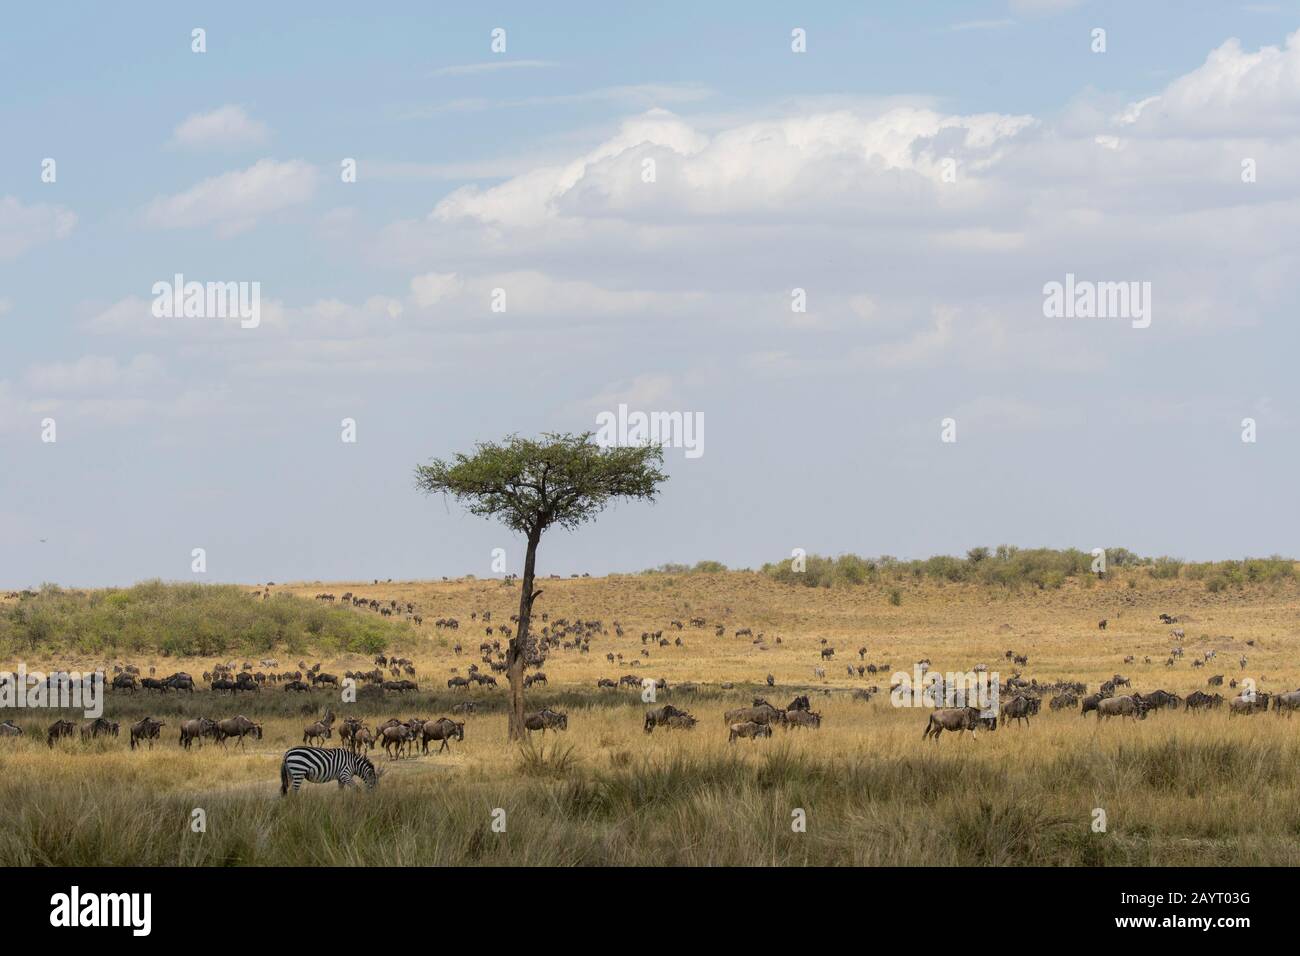 Wildebeests, also called gnus or wildebai, and Plains zebras (Equus quagga, formerly Equus burchellii) also known as the common zebra or Burchell's ze Stock Photo